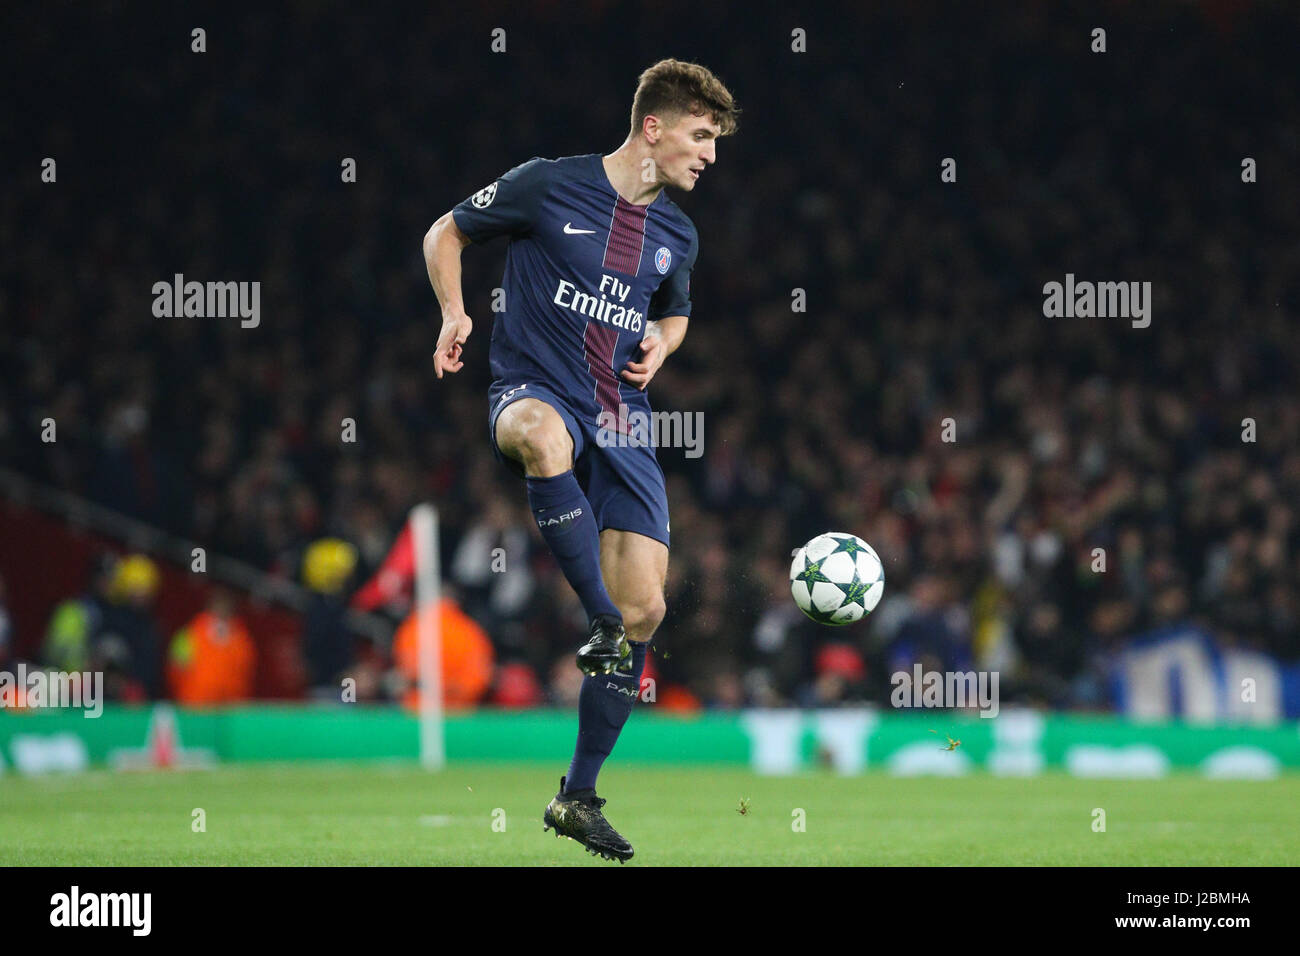 Thomas Meunier of Paris Saint-Germain during the UEFA Champions League match between Arsenal and Paris Saint-Germain at the Emirates Stadium in London. November 23, 2016. Arron Gent / Telephoto Images EDITORIAL USE ONLY  FA Premier League and Football League images are subject to DataCo Licence see www.football-dataco.com Stock Photo